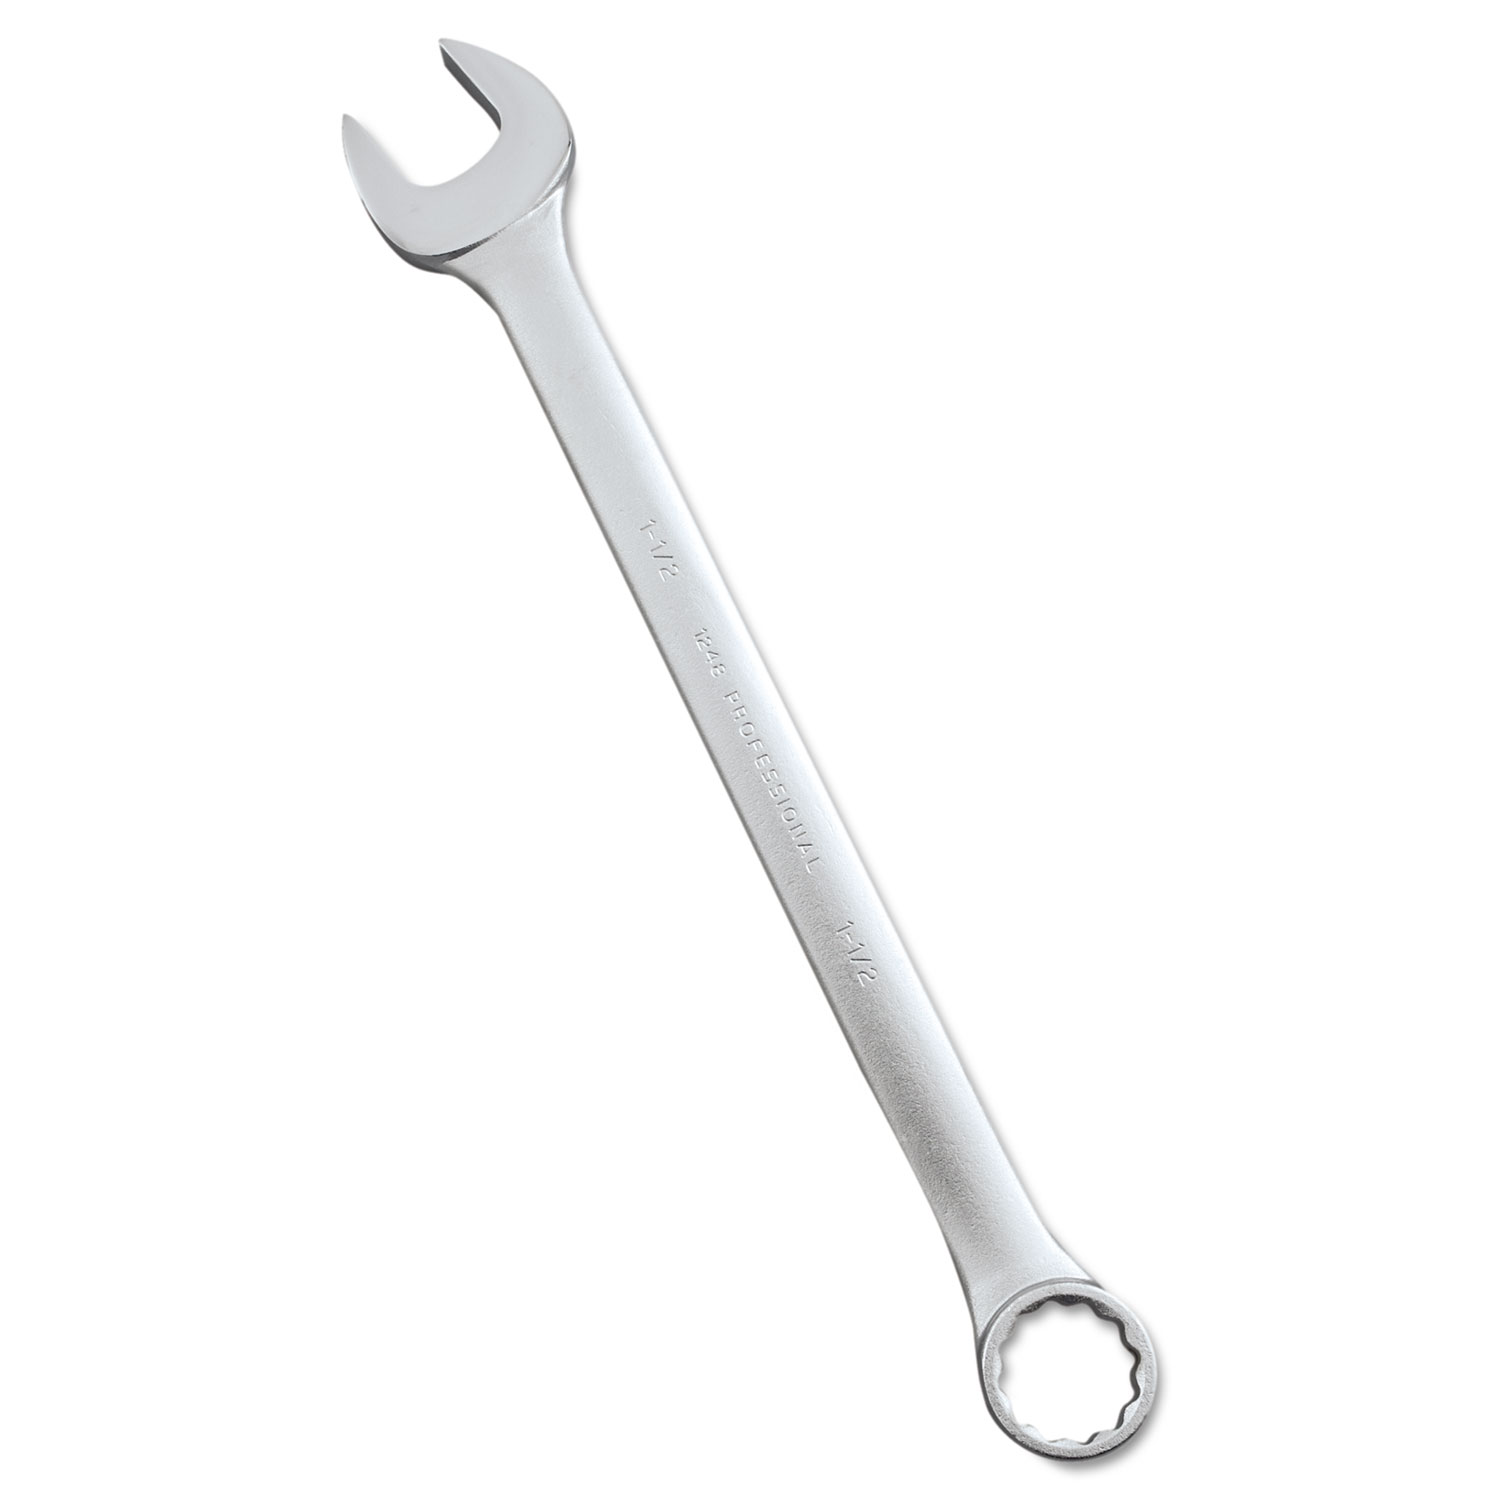  PROTO J1248 PROTO Combination Wrench, 20 1/4 Long, 1 1/2 Opening, 12-Point Box (PTO1248) 